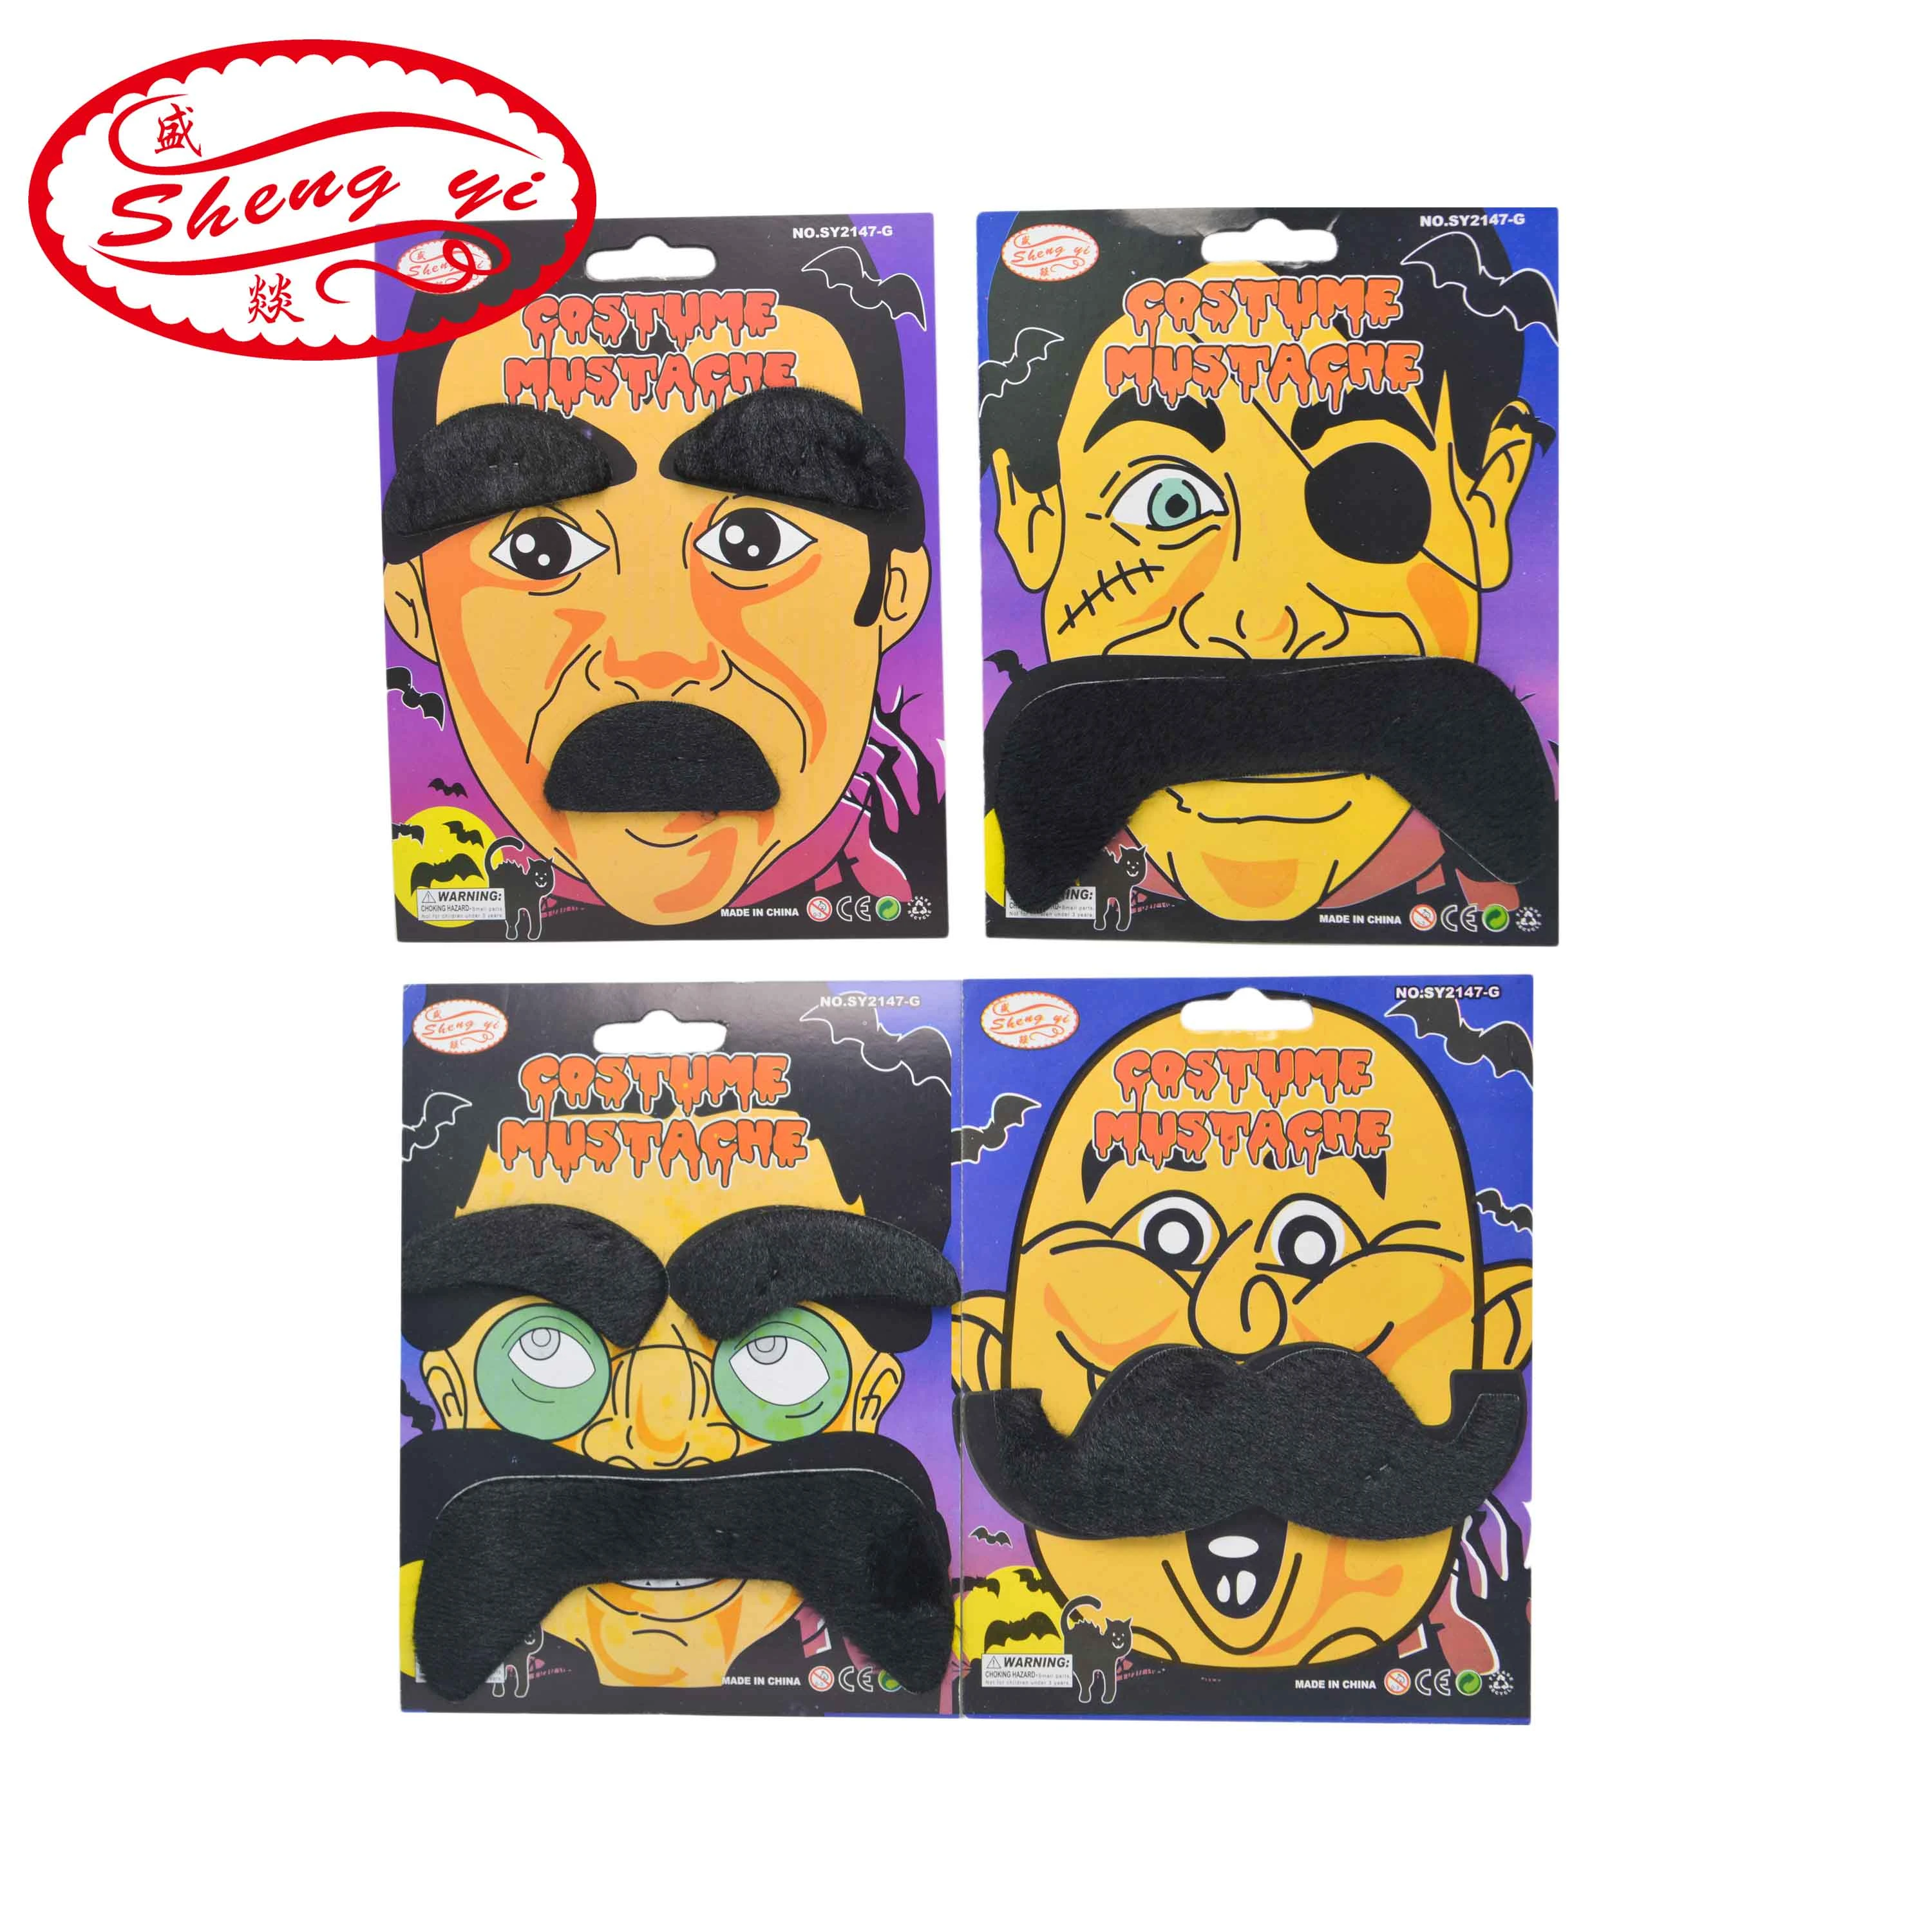 SHENGYI Costume Japanese Mustache Savage Pirate Decoration Masquerade Props  Children Funny Props Beard Mustache Tricky Toys|Gags & Practical Jokes| -  AliExpress